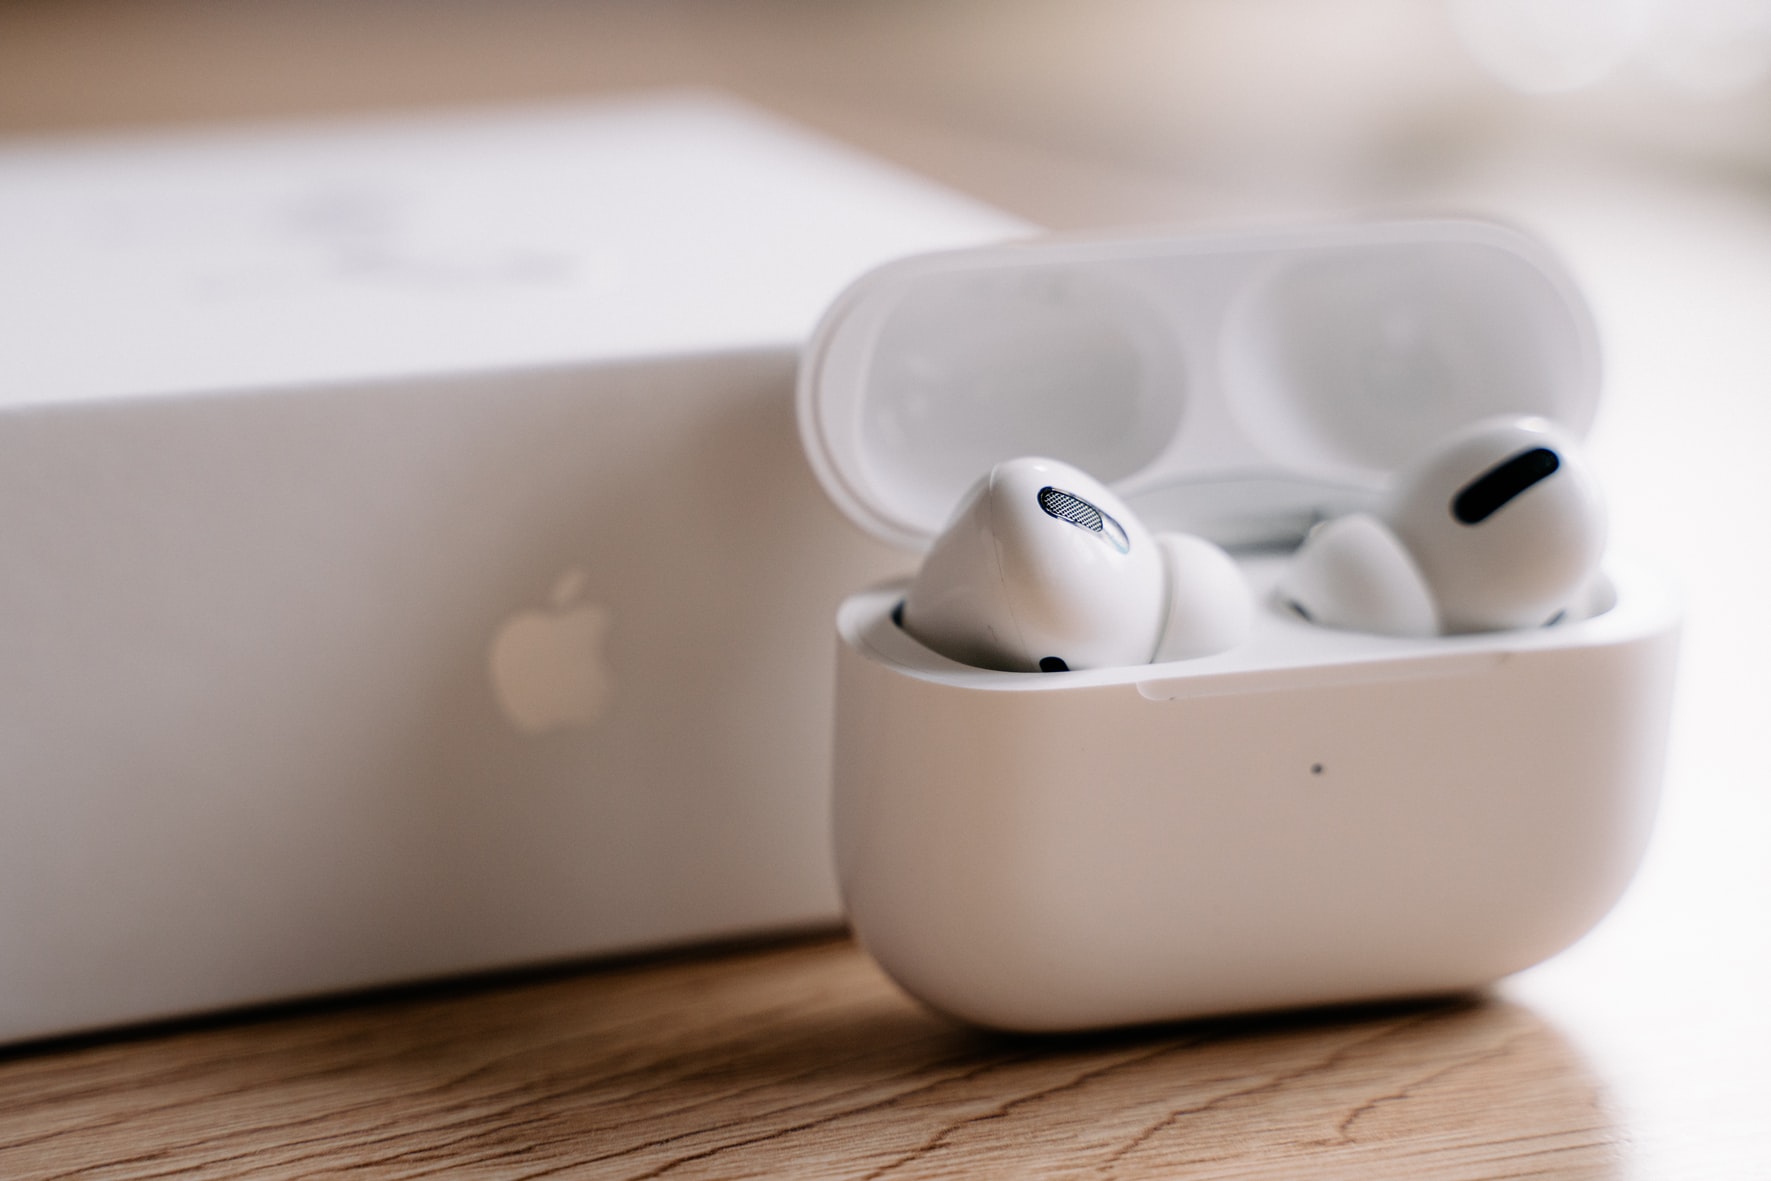 Apple AirPods Pro 2 remain on track for a 2022 release as rumours